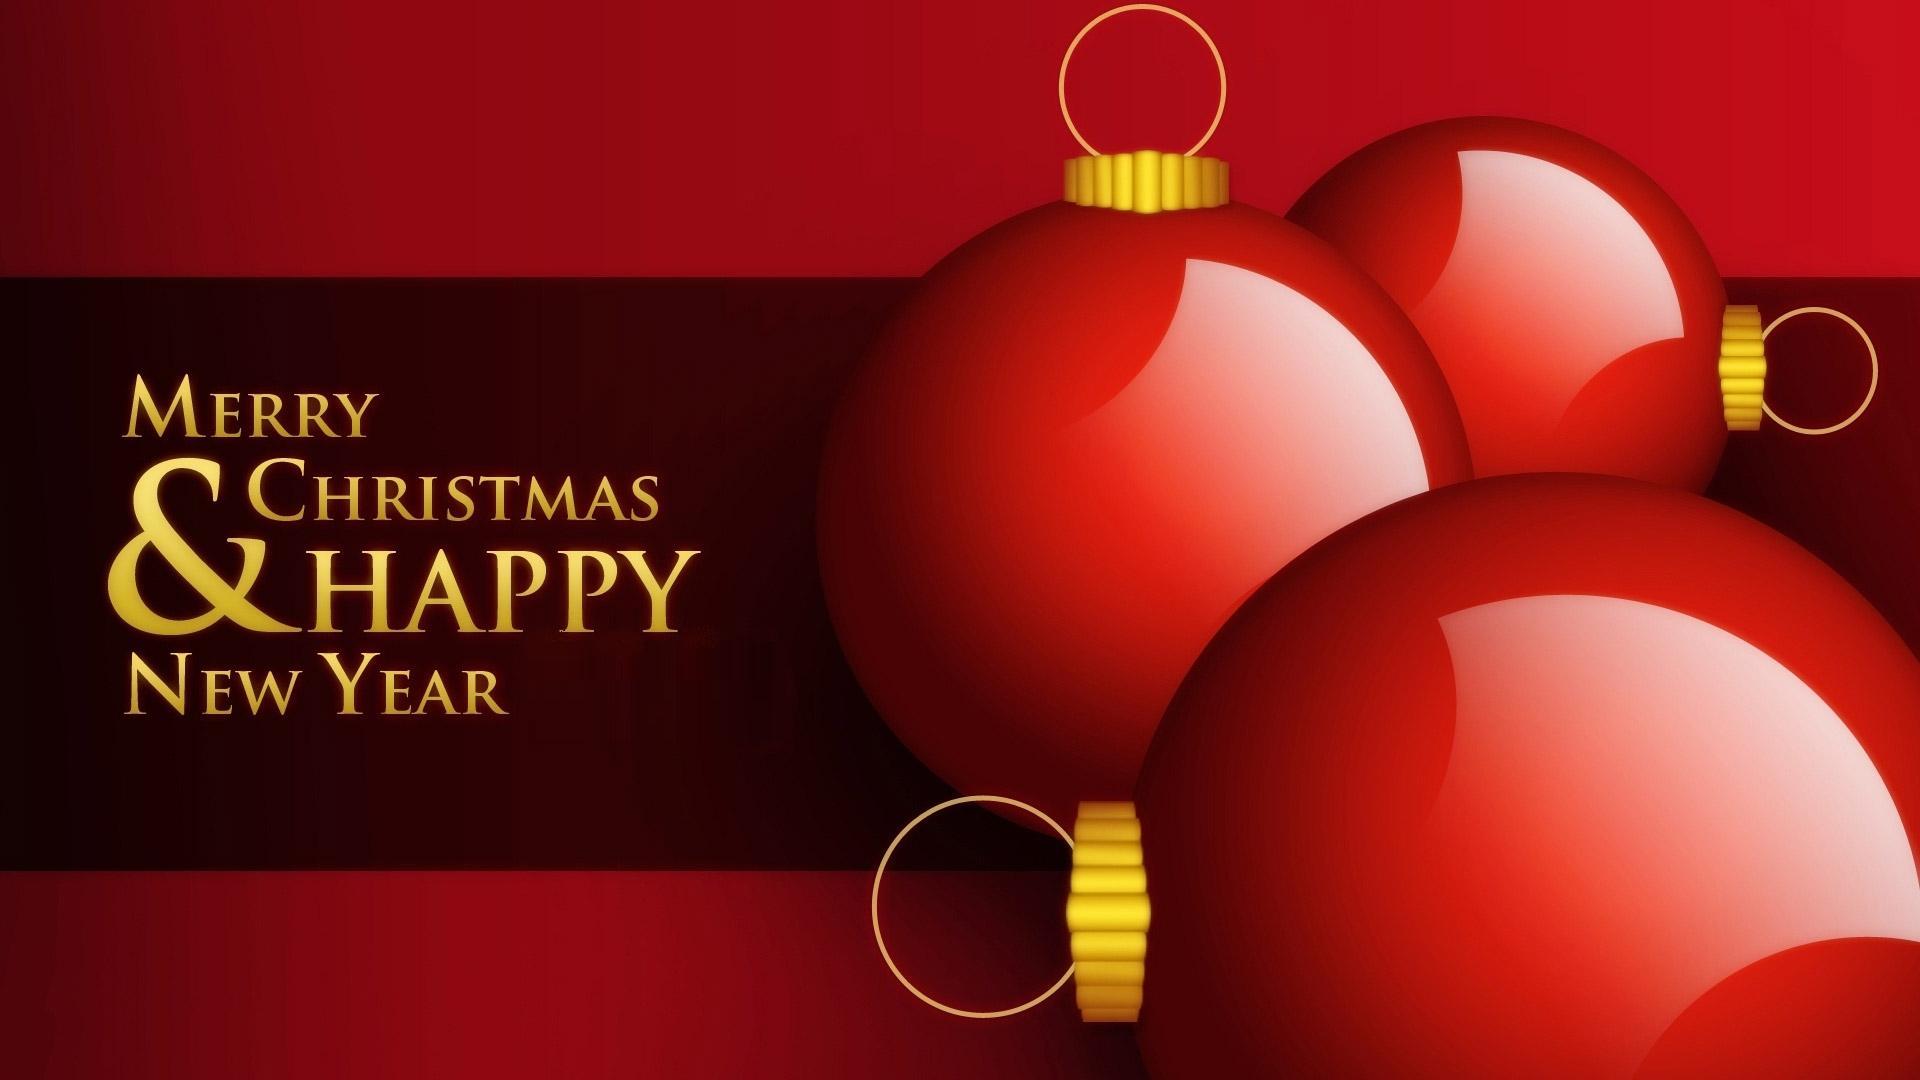 Merry Christmas 2019 & Happy New Year 2020 WhatsApp Messages